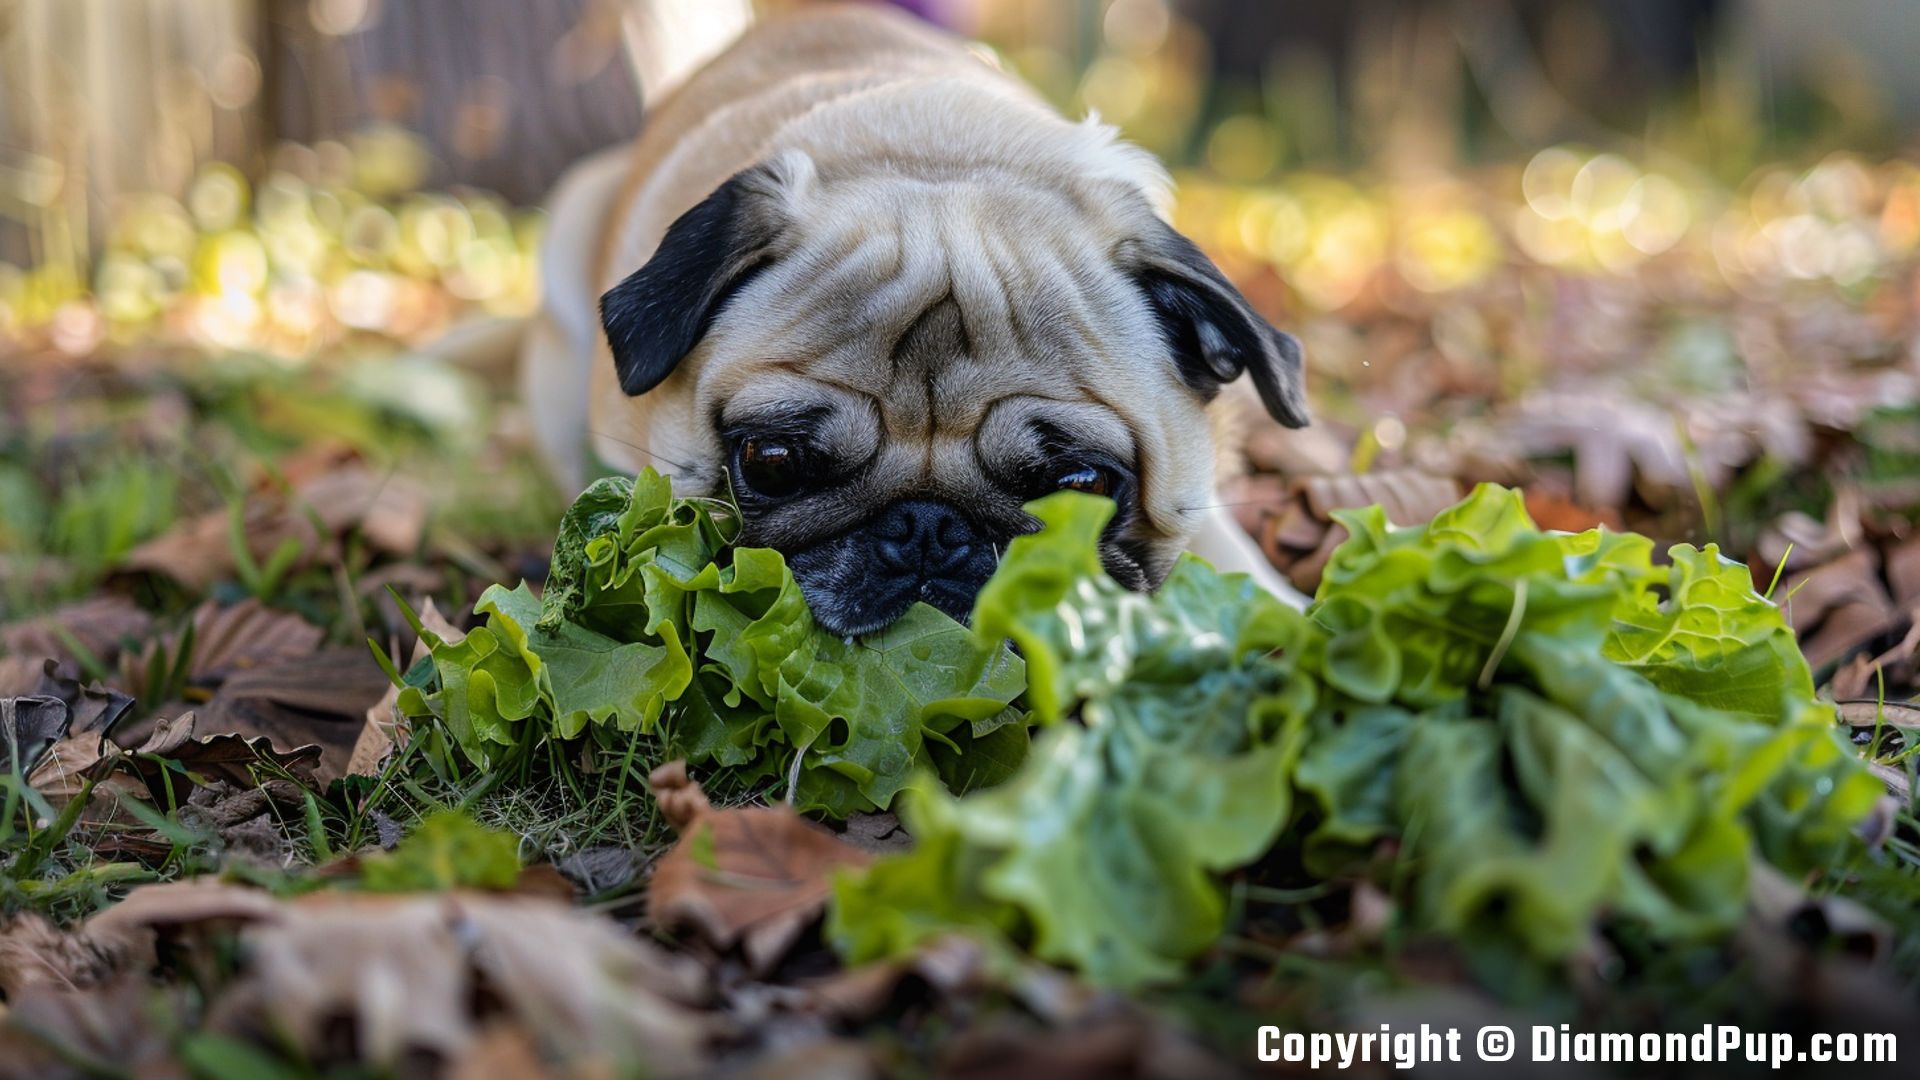 Photograph of Pug Snacking on Lettuce